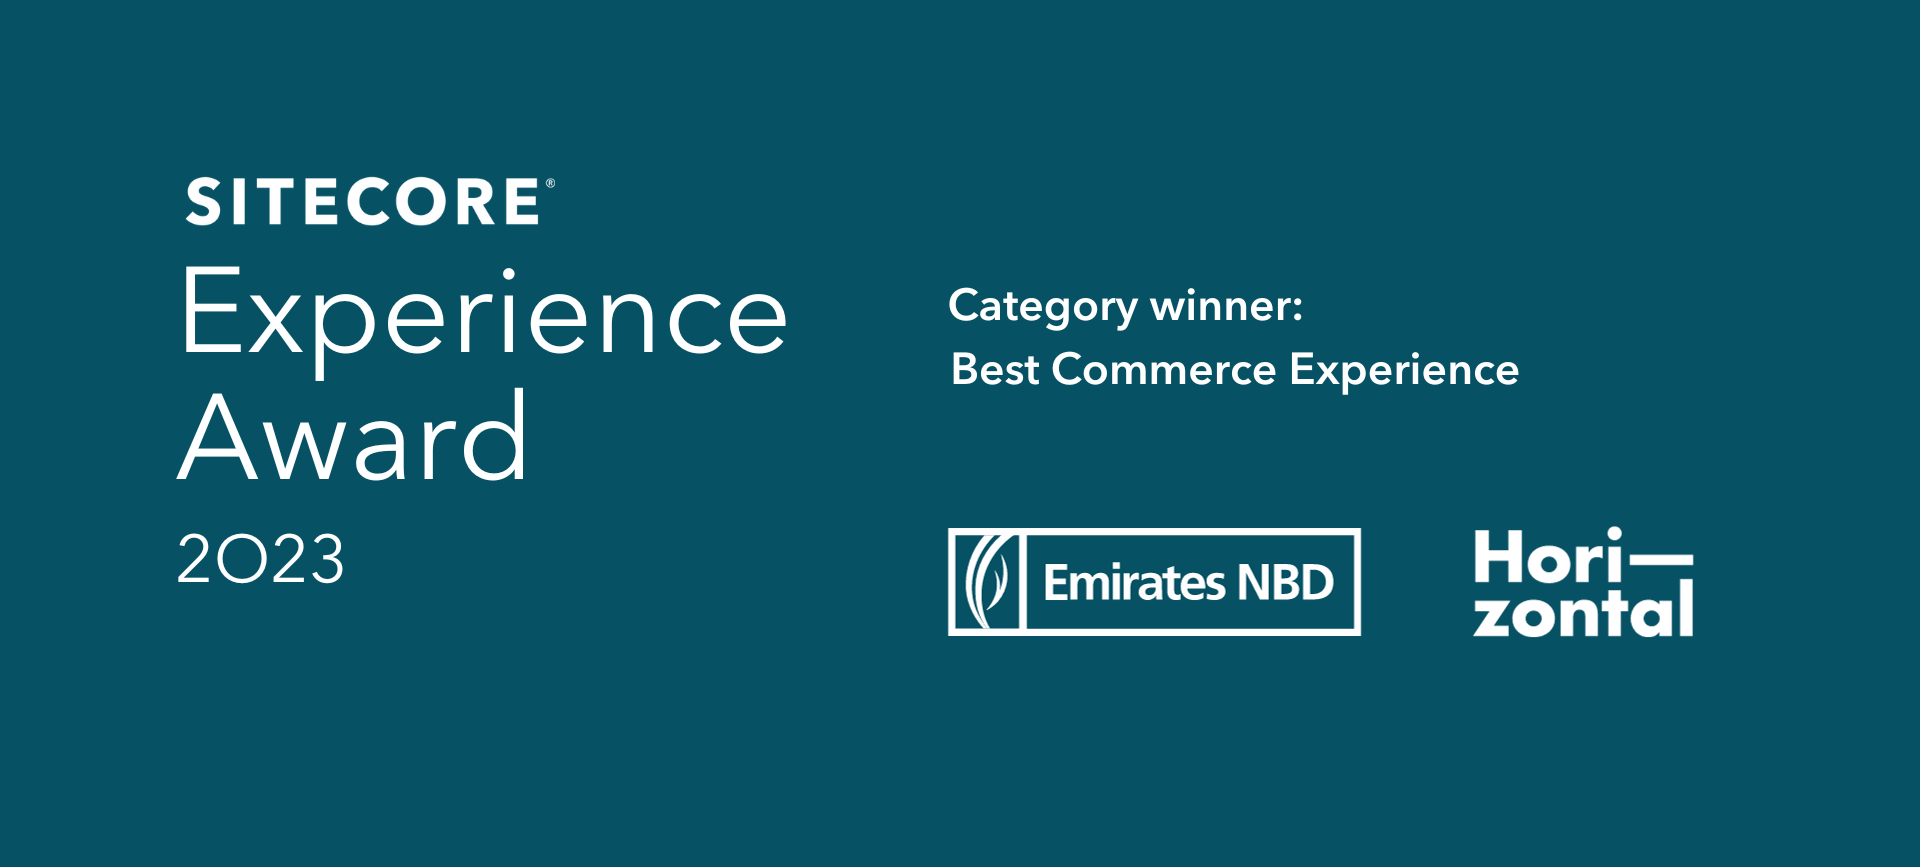 Horizontal Digital Wins 2023 Sitecore Experience Award for Best Commerce Experience In EMEA 